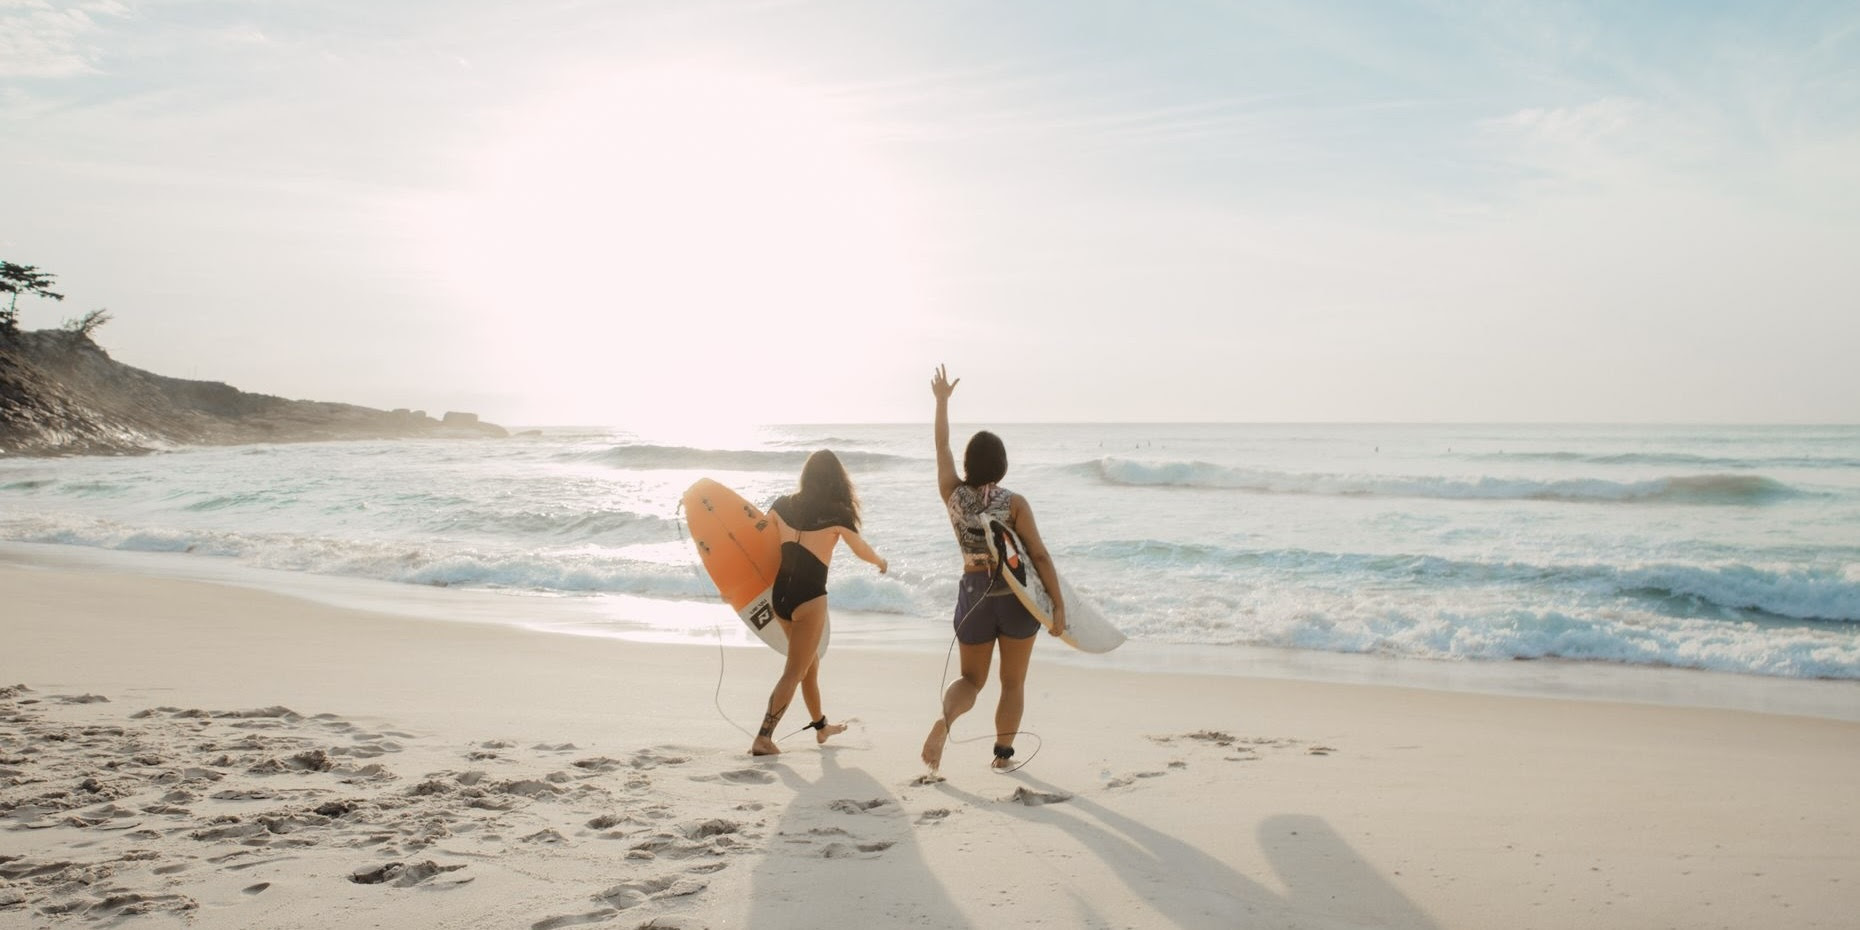 A photograph of a beach at sunrise, with two white woman holding surf boards walking to the water.